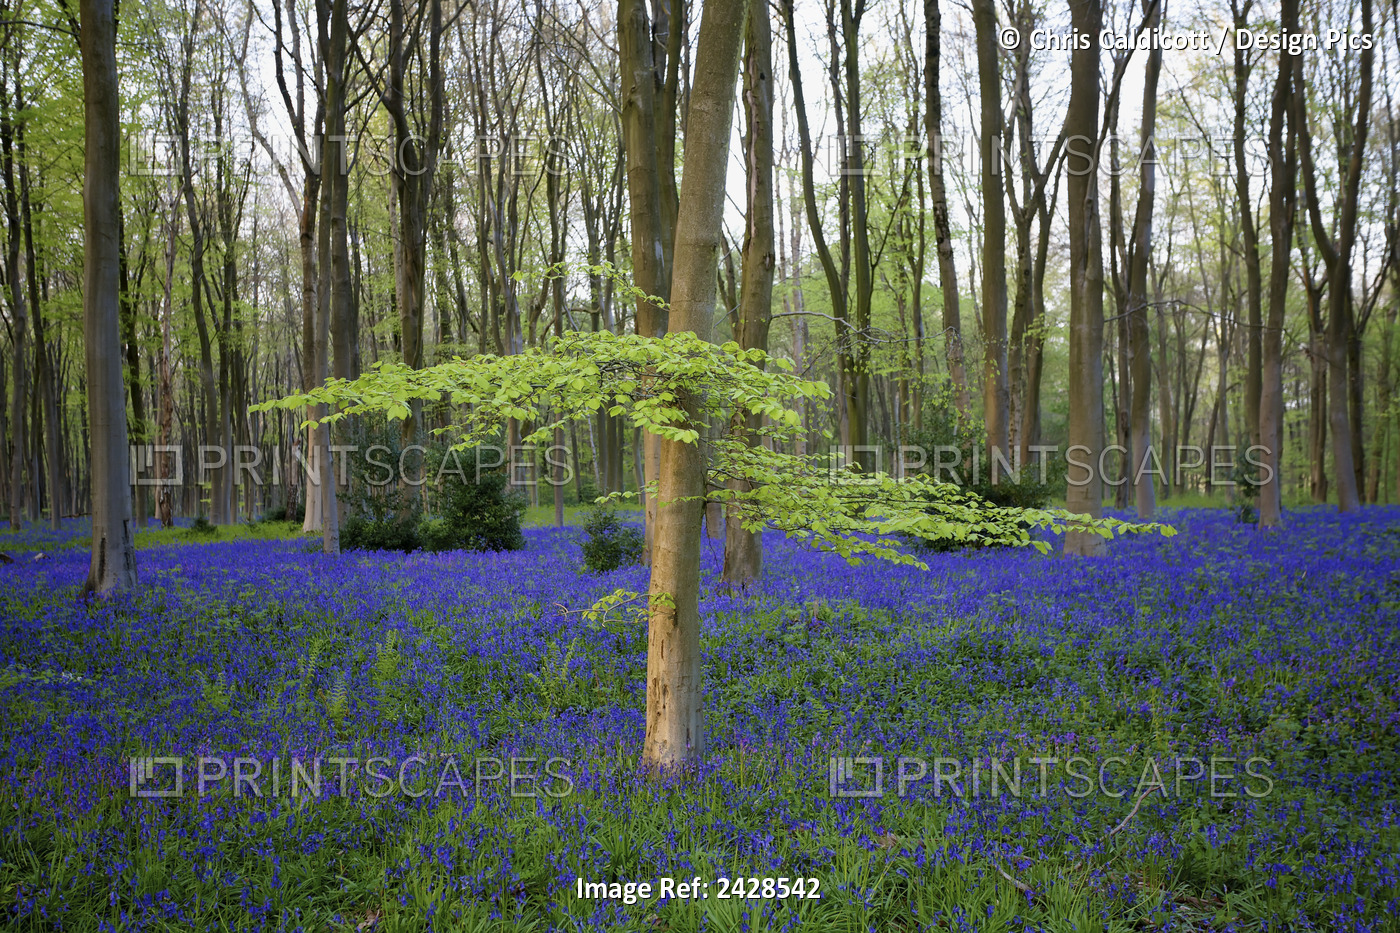 Bluebells In The Woods; Hampshire, England